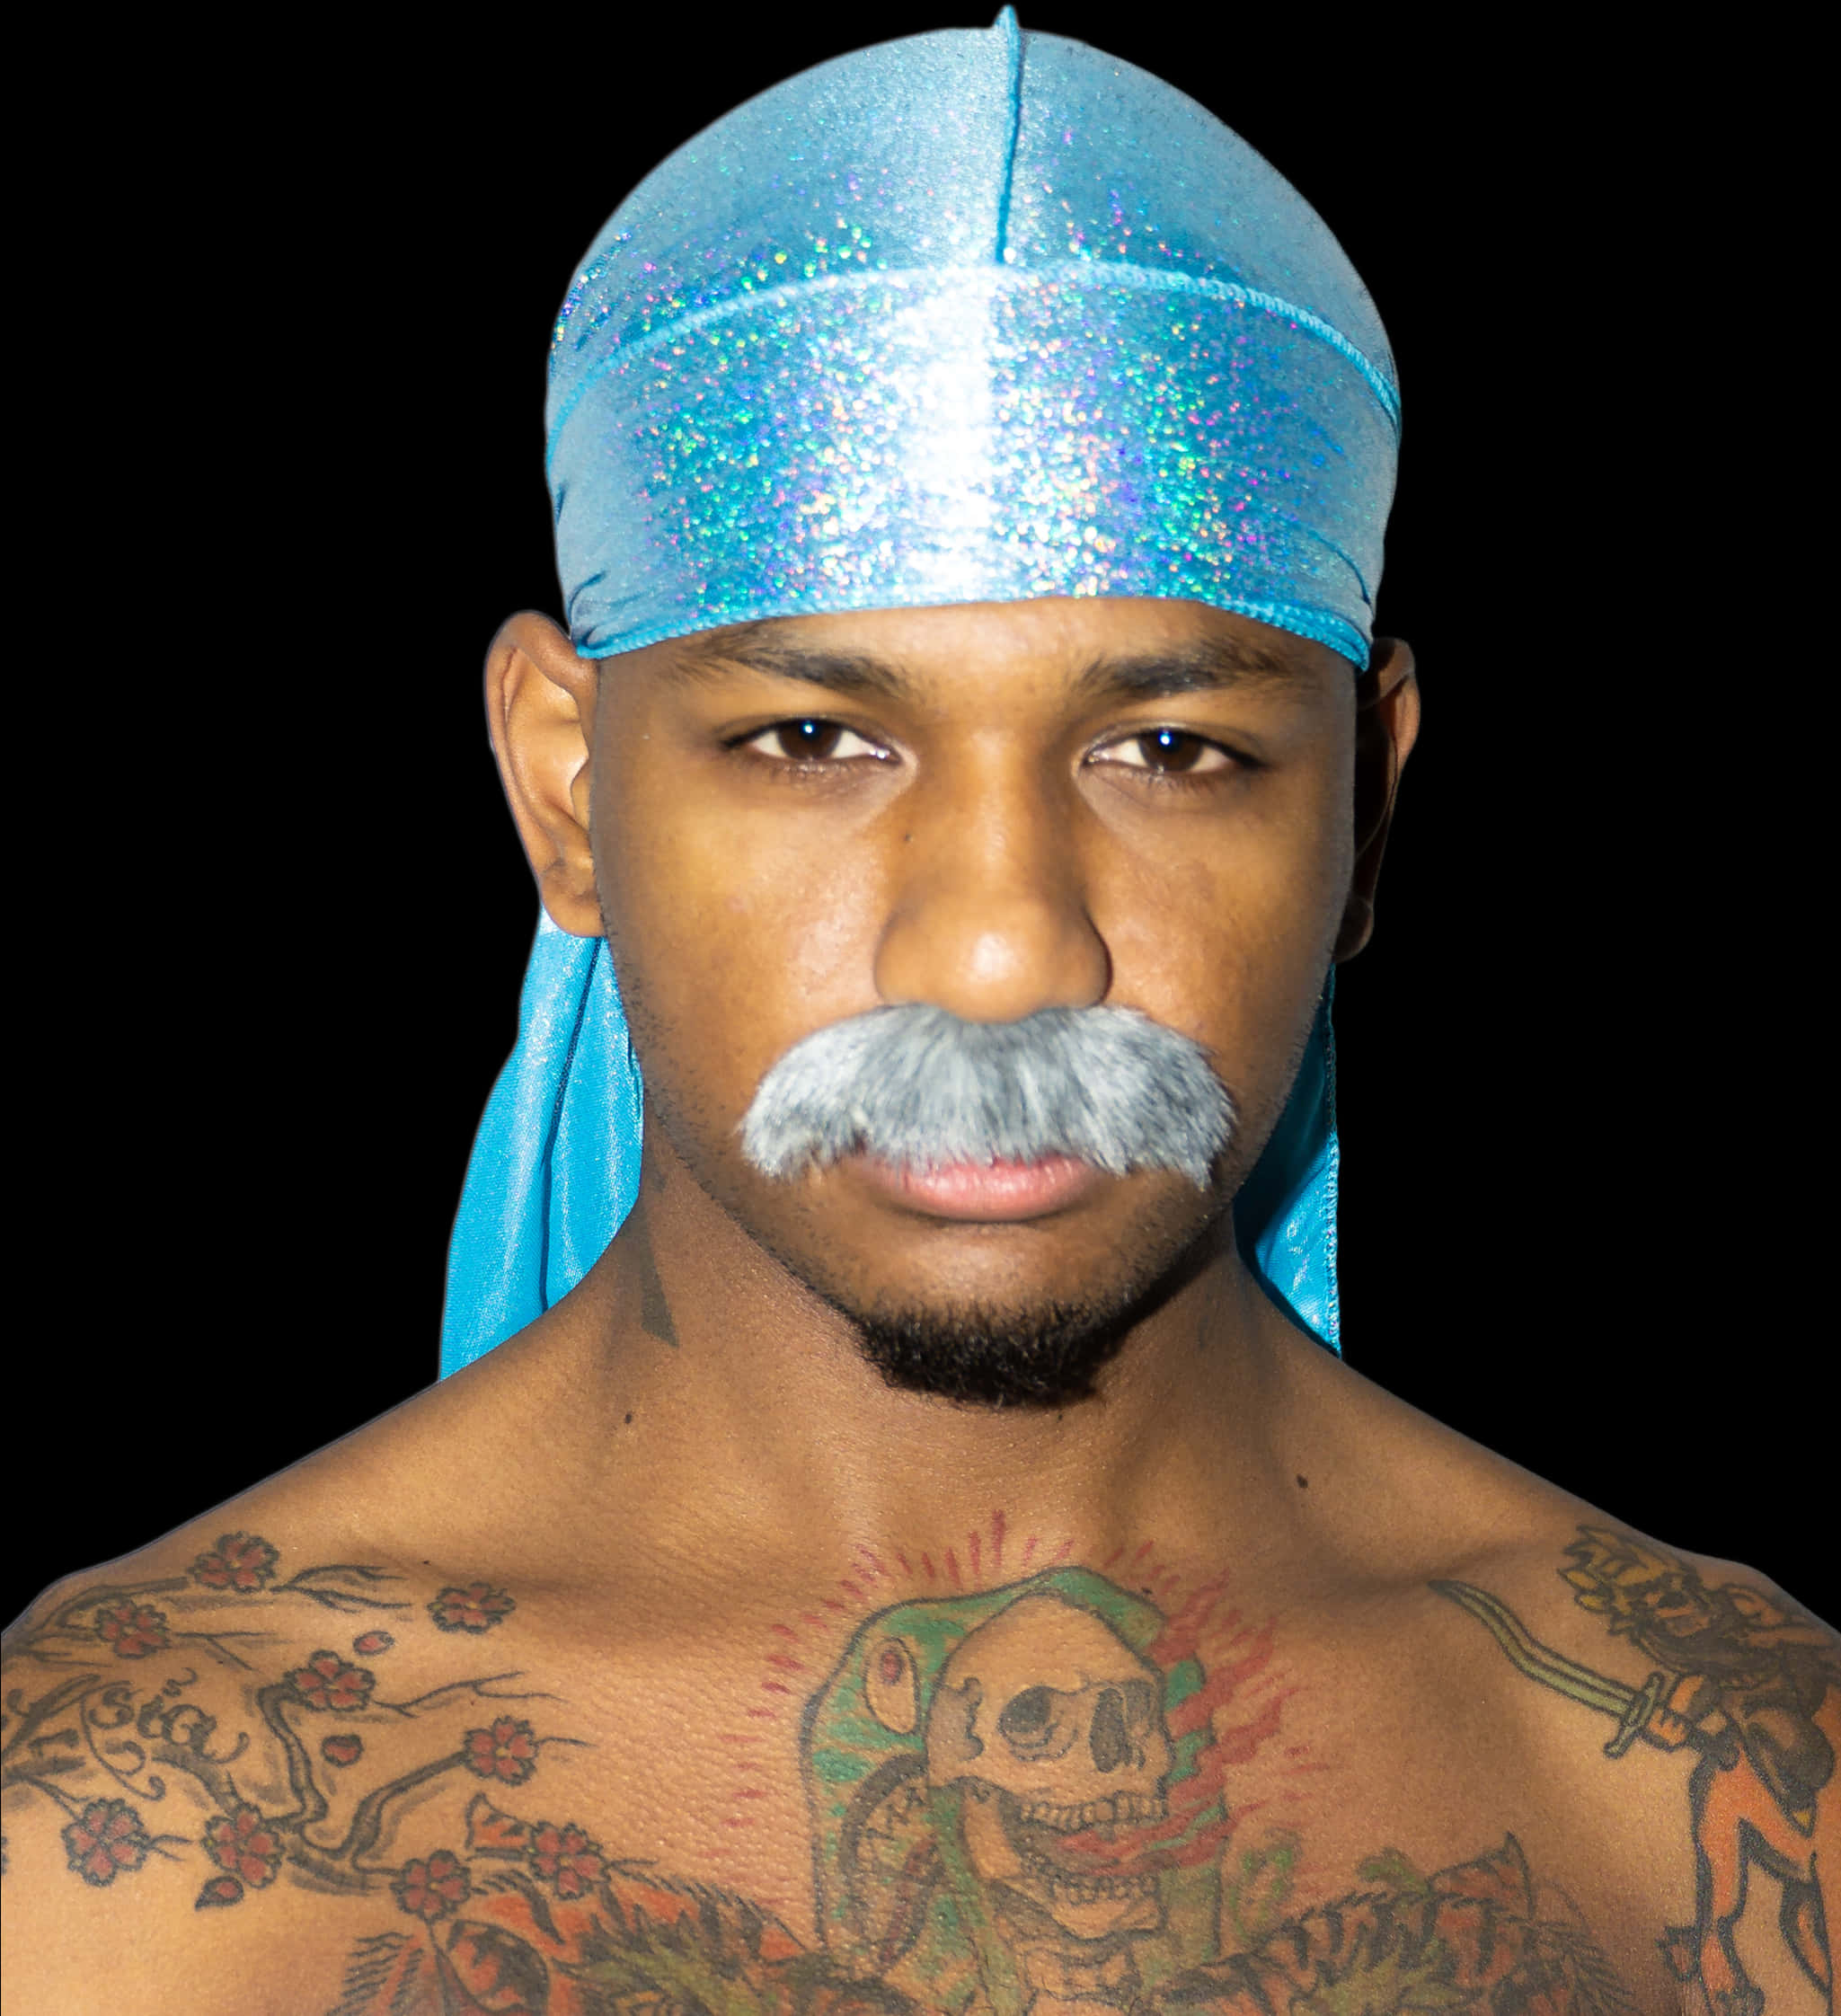 Manwith Blue Sparkly Duragand Tattoos PNG